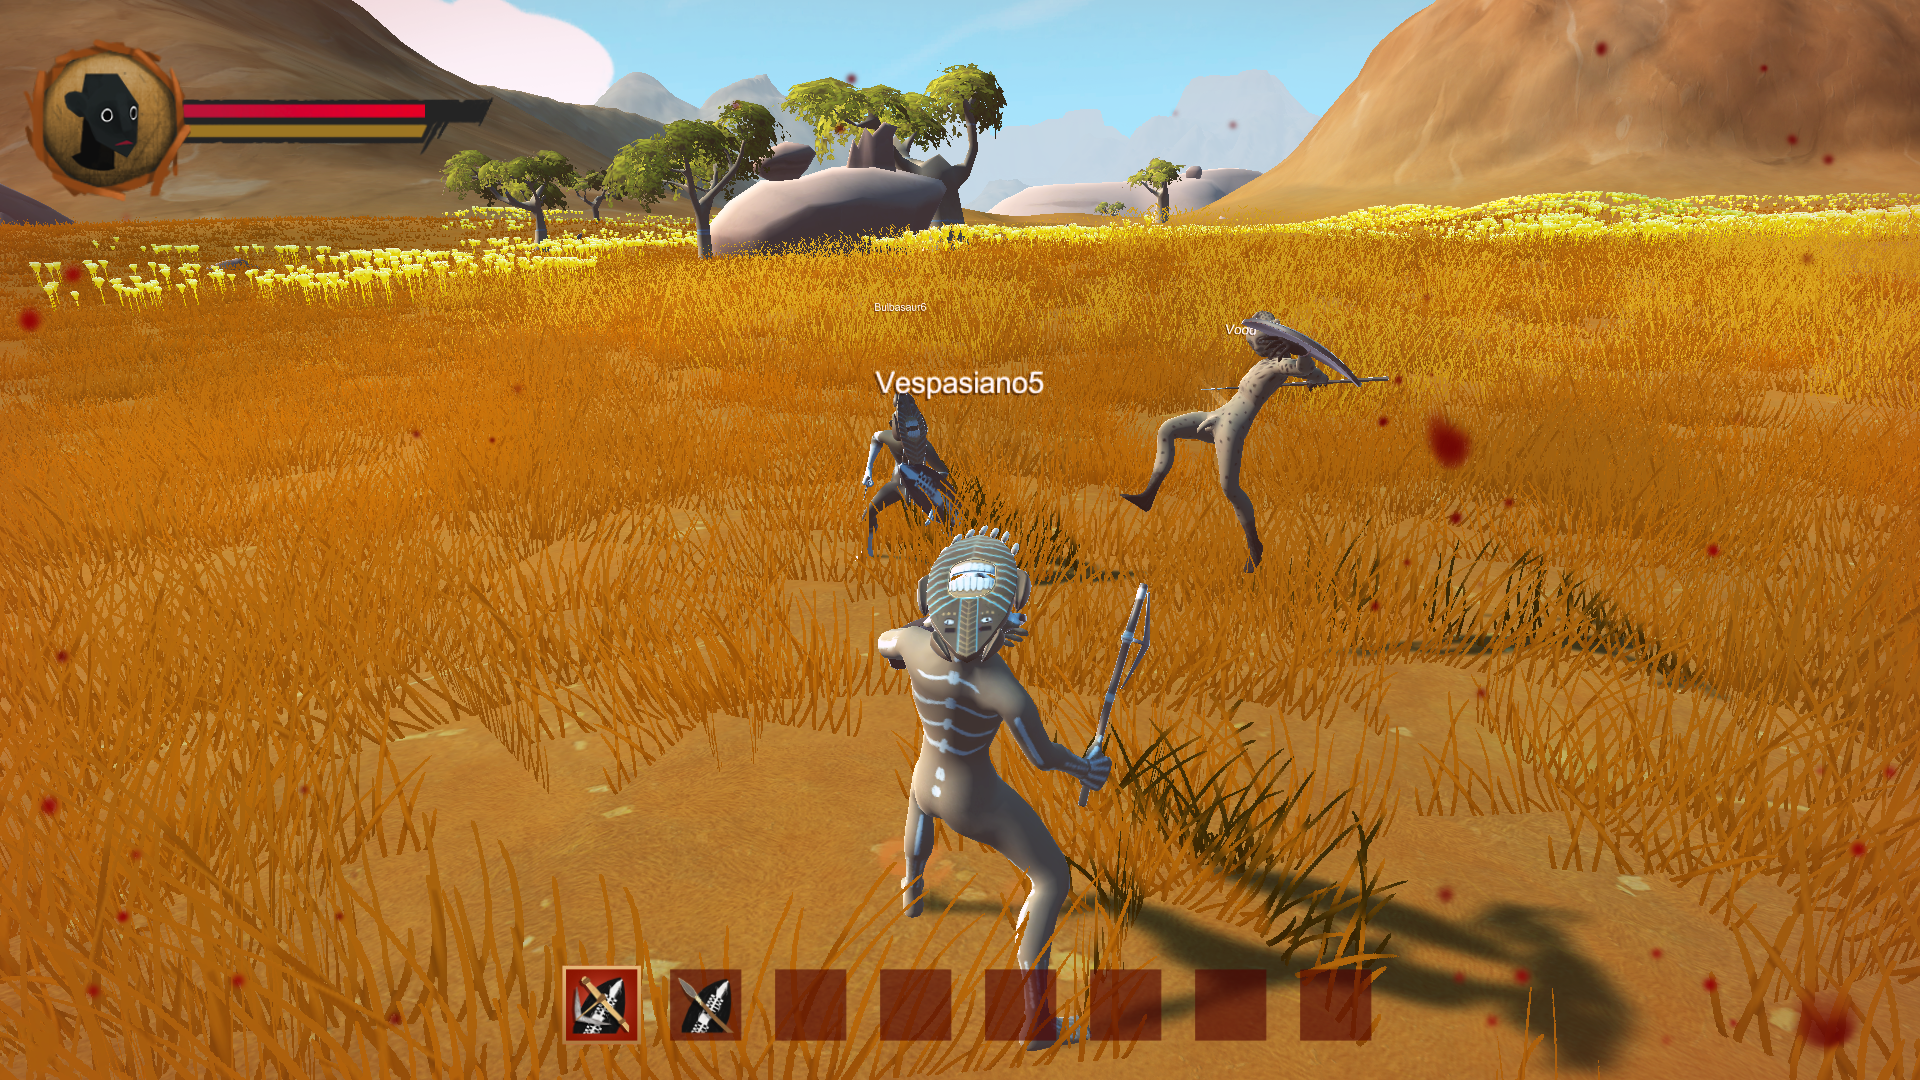 Voodoo: Open-World Survival In Primal Africa On Steam! by